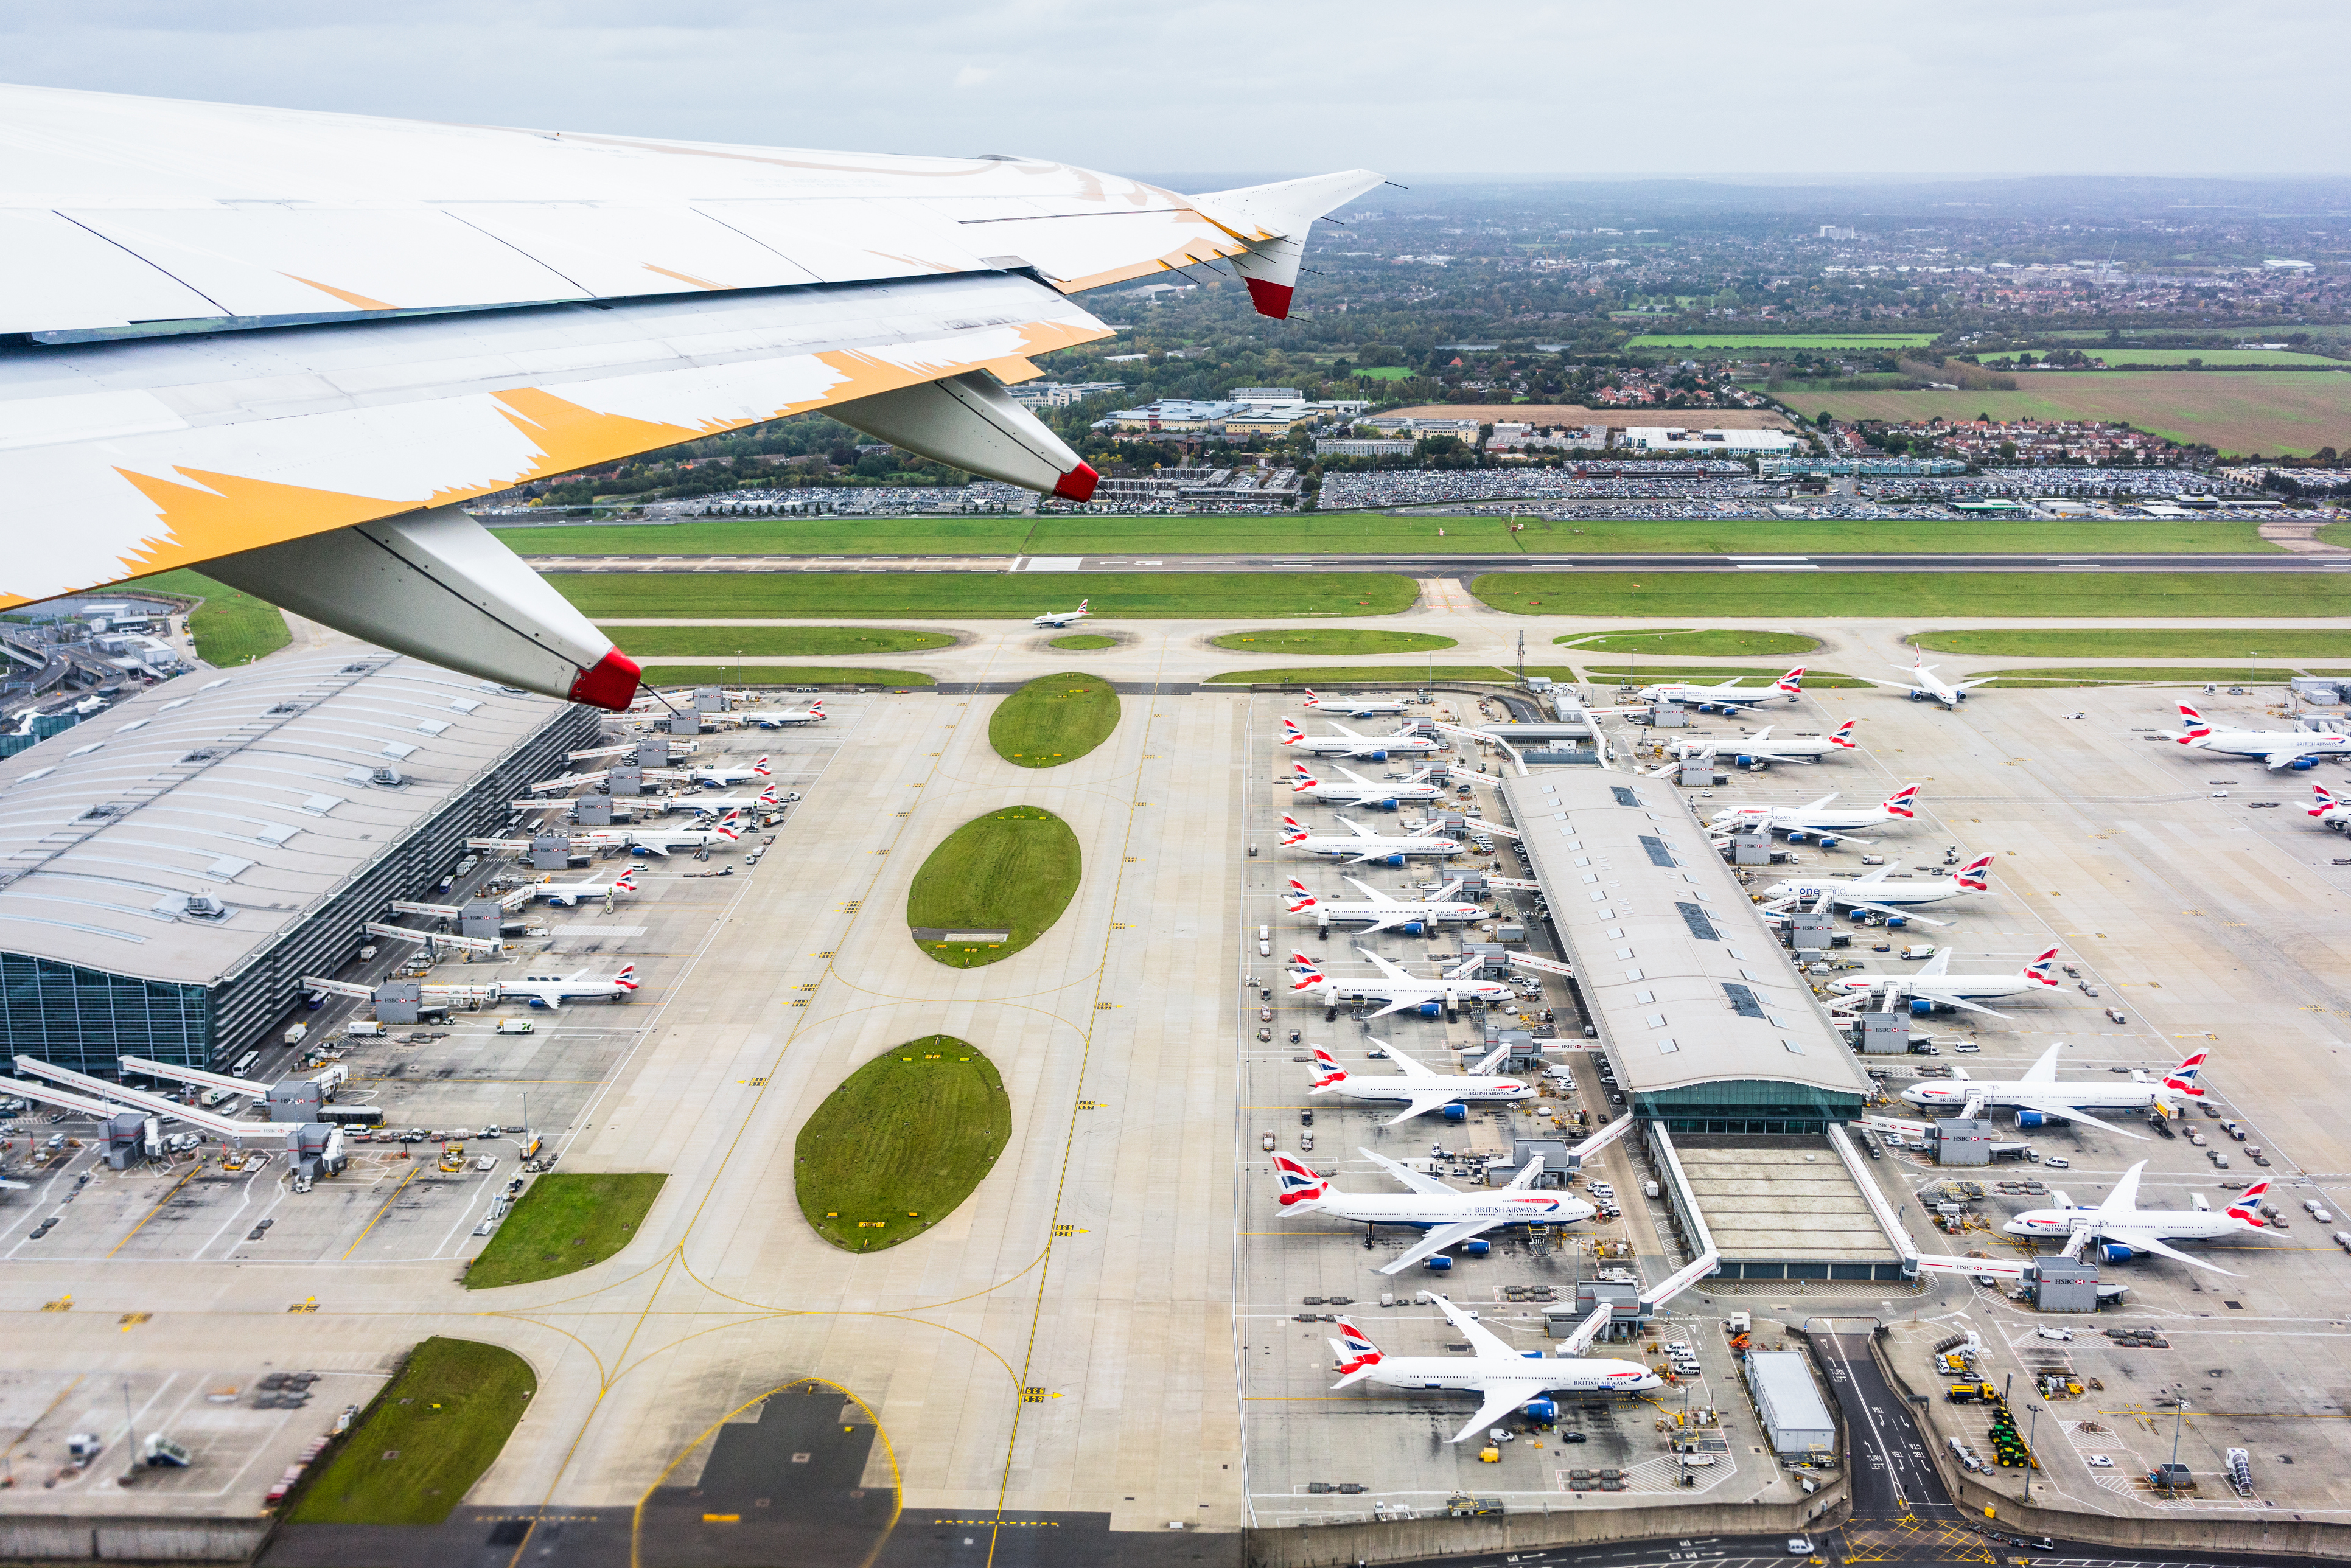 Wastewater pump stations take Flygt across Heathrow